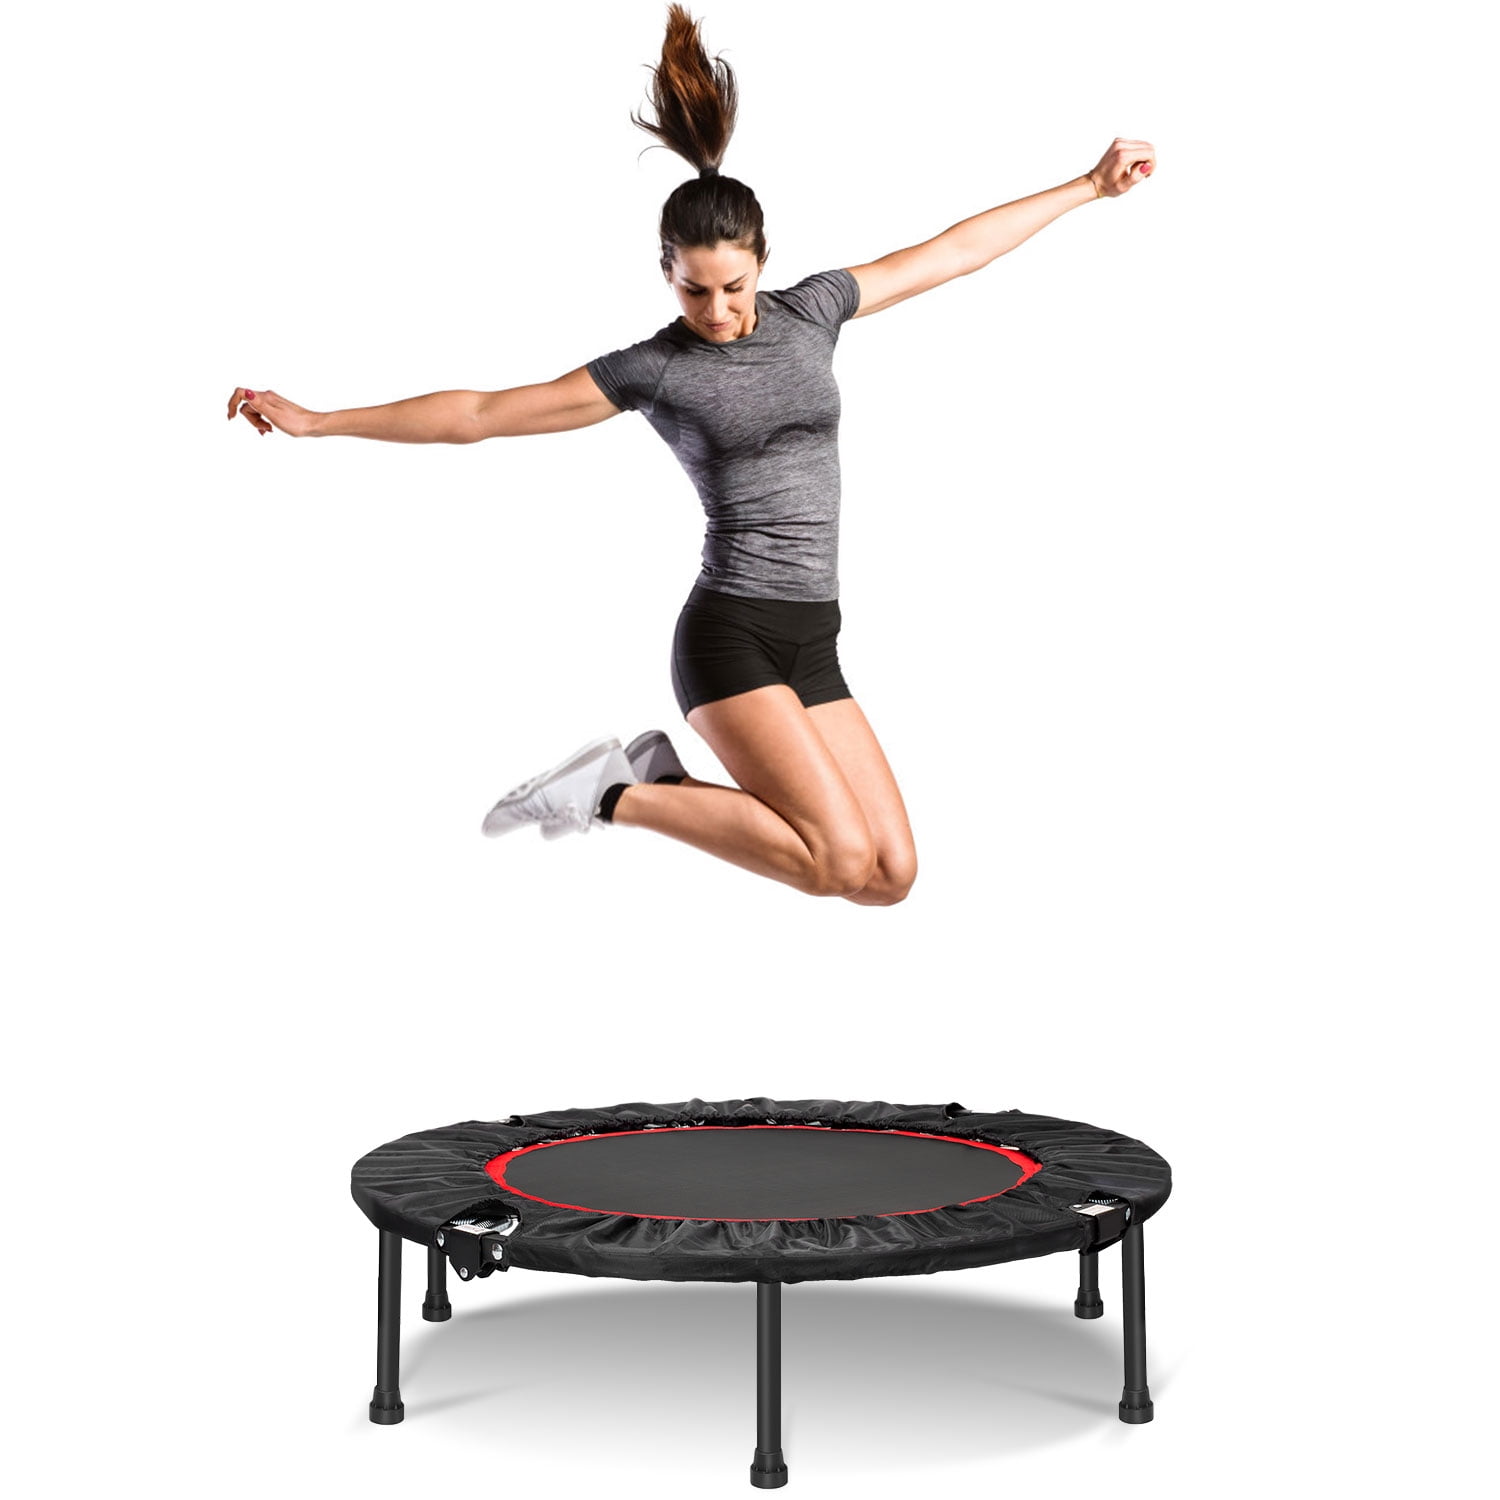 Details about   40" Portable Foldable Fitness Trampoline Mini Rebounder Indoor Outdoor Sports US 